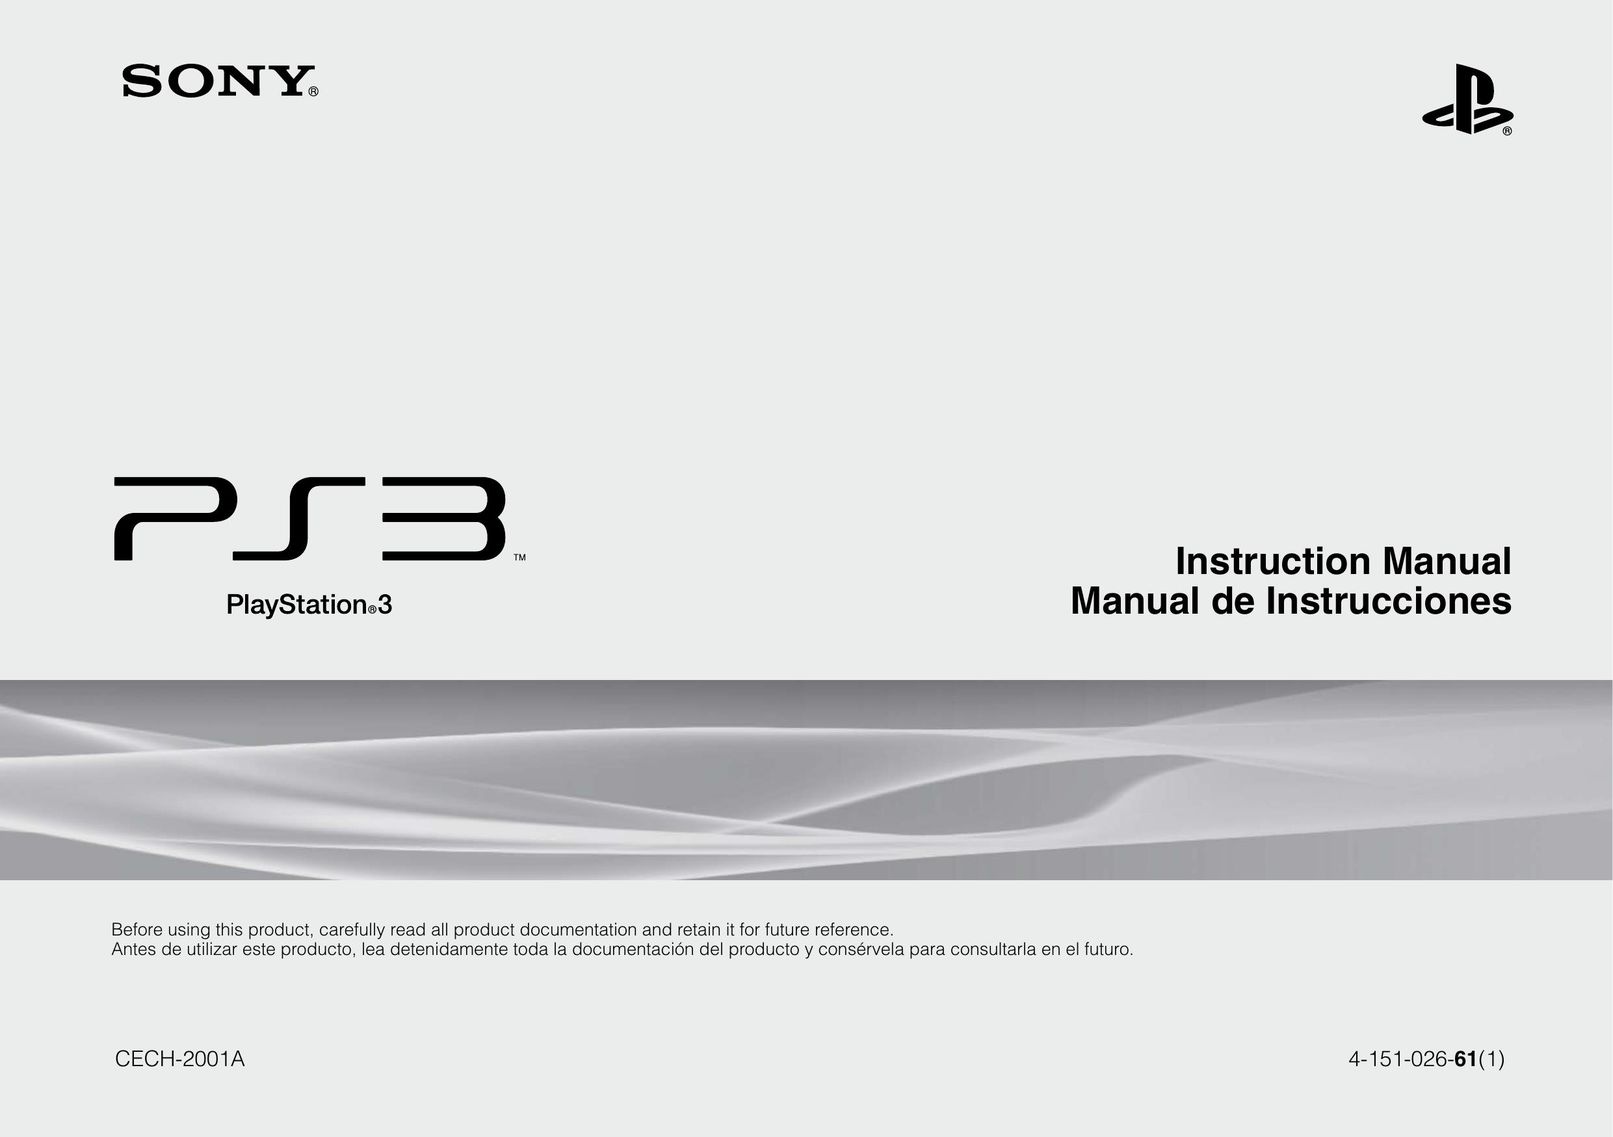 Sony CECH-2001A Video Game Console User Manual